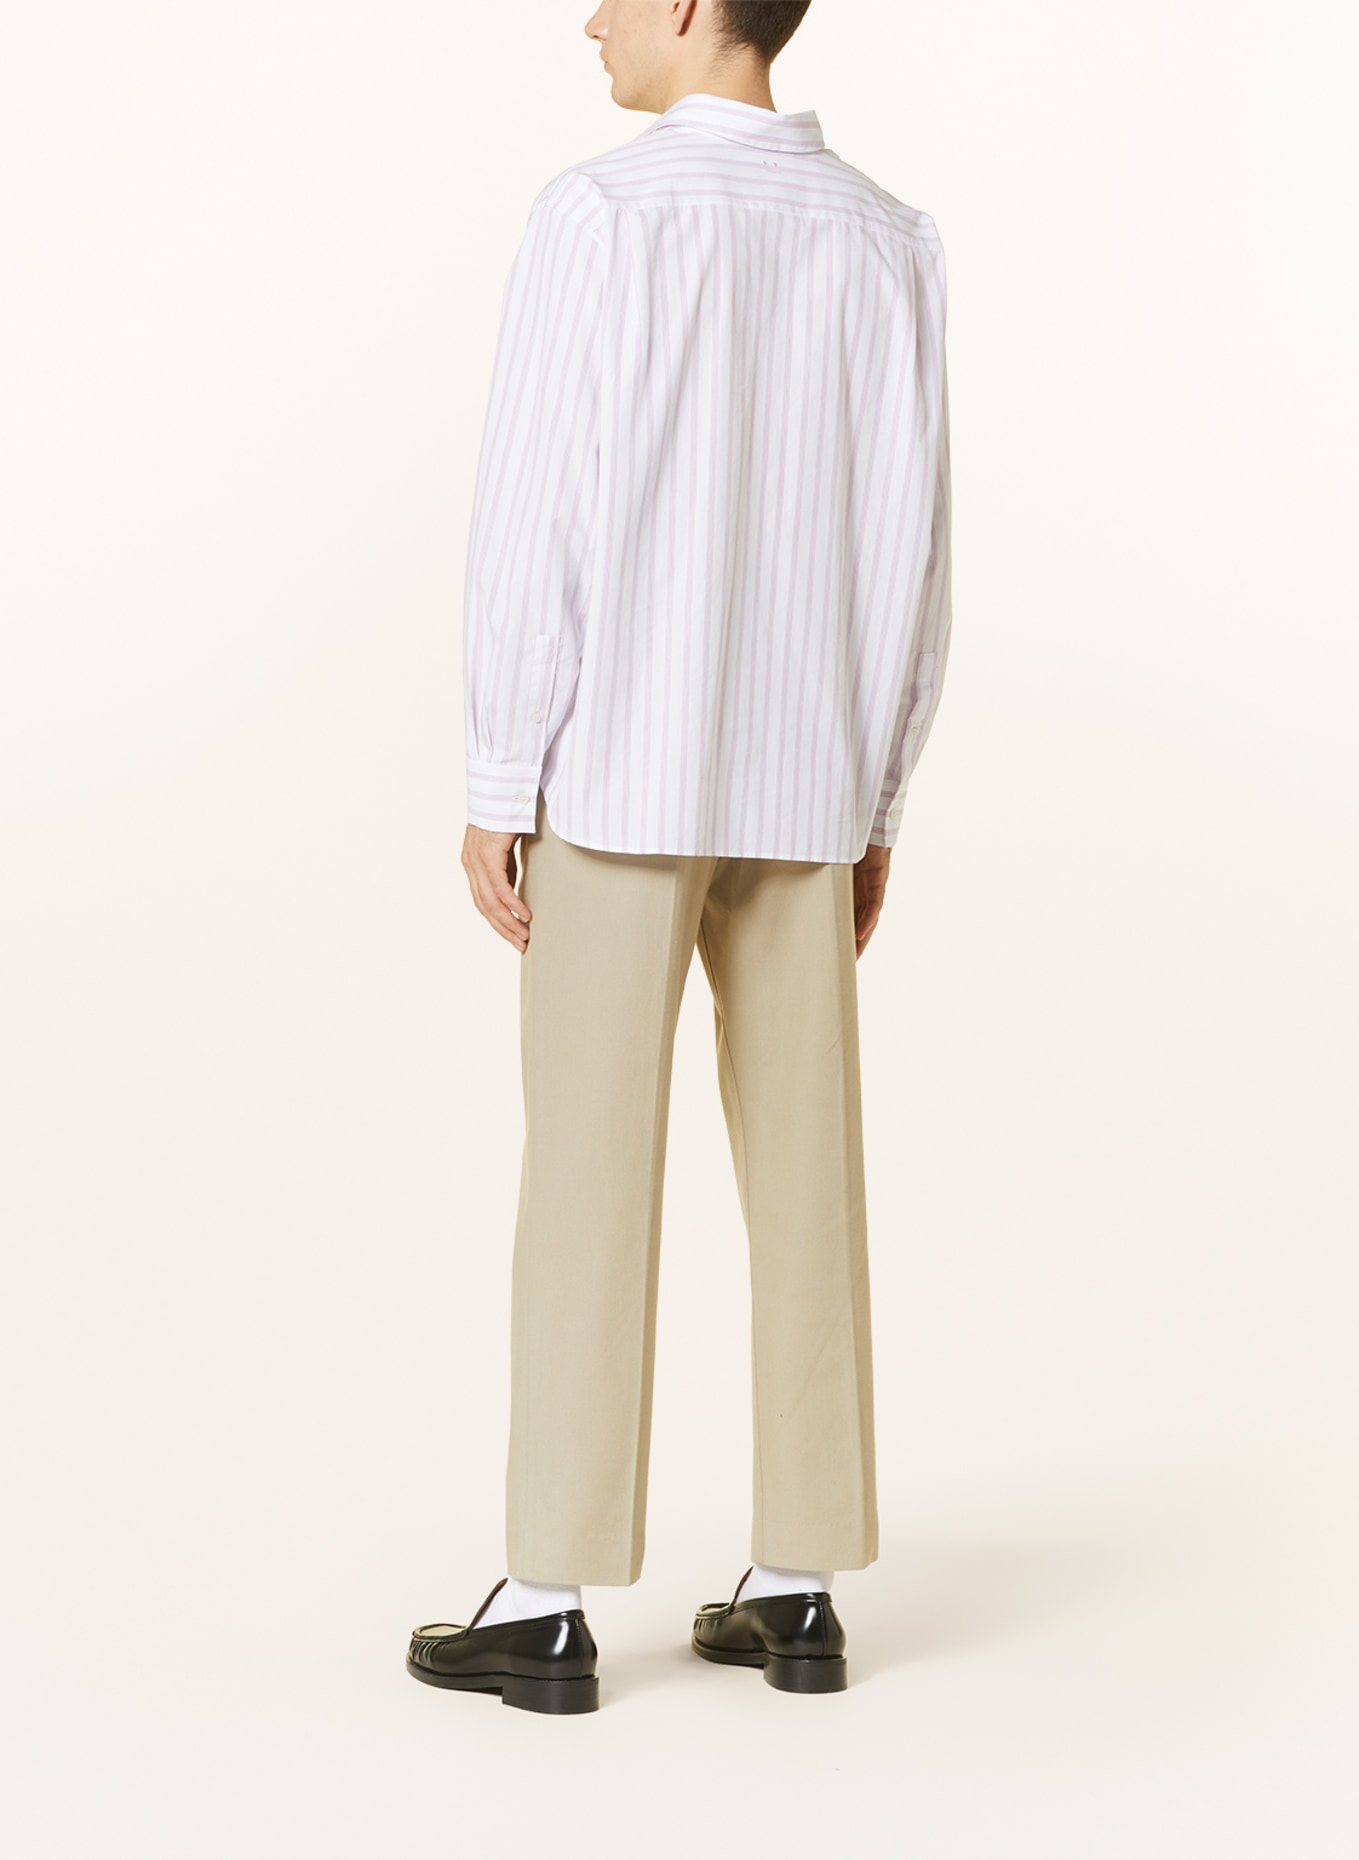 Acne Studios Hemd Relaxed Fit, Farbe: WEISS/ ROSA (Bild 3)